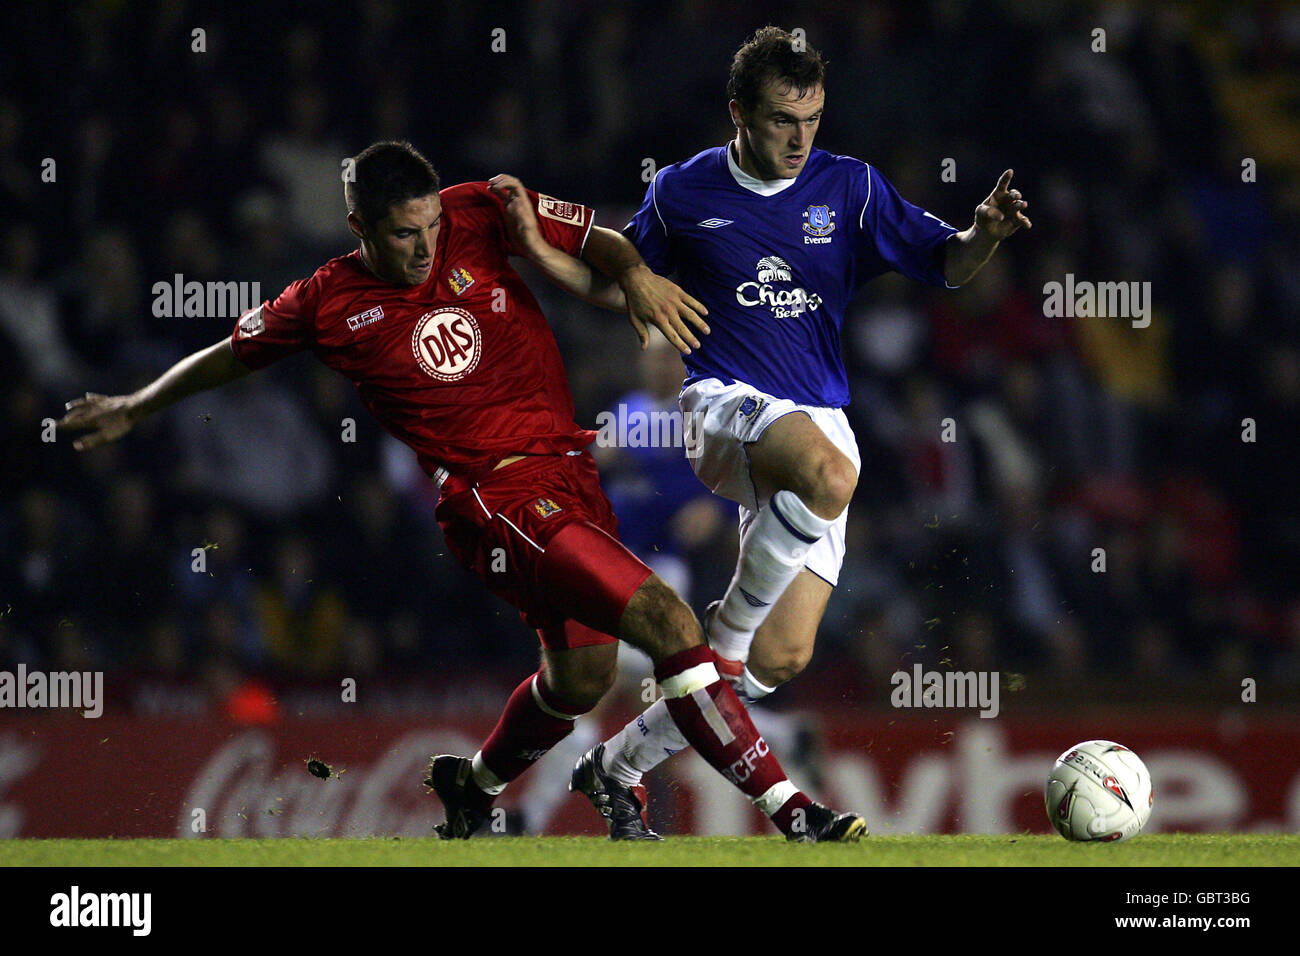 Soccer - Carling Cup - Second Round - Bristol City v Everton. Bristol City's Bradley Orr (l) gets the ball away under pressure from Everton's James McFadden (r) Stock Photo